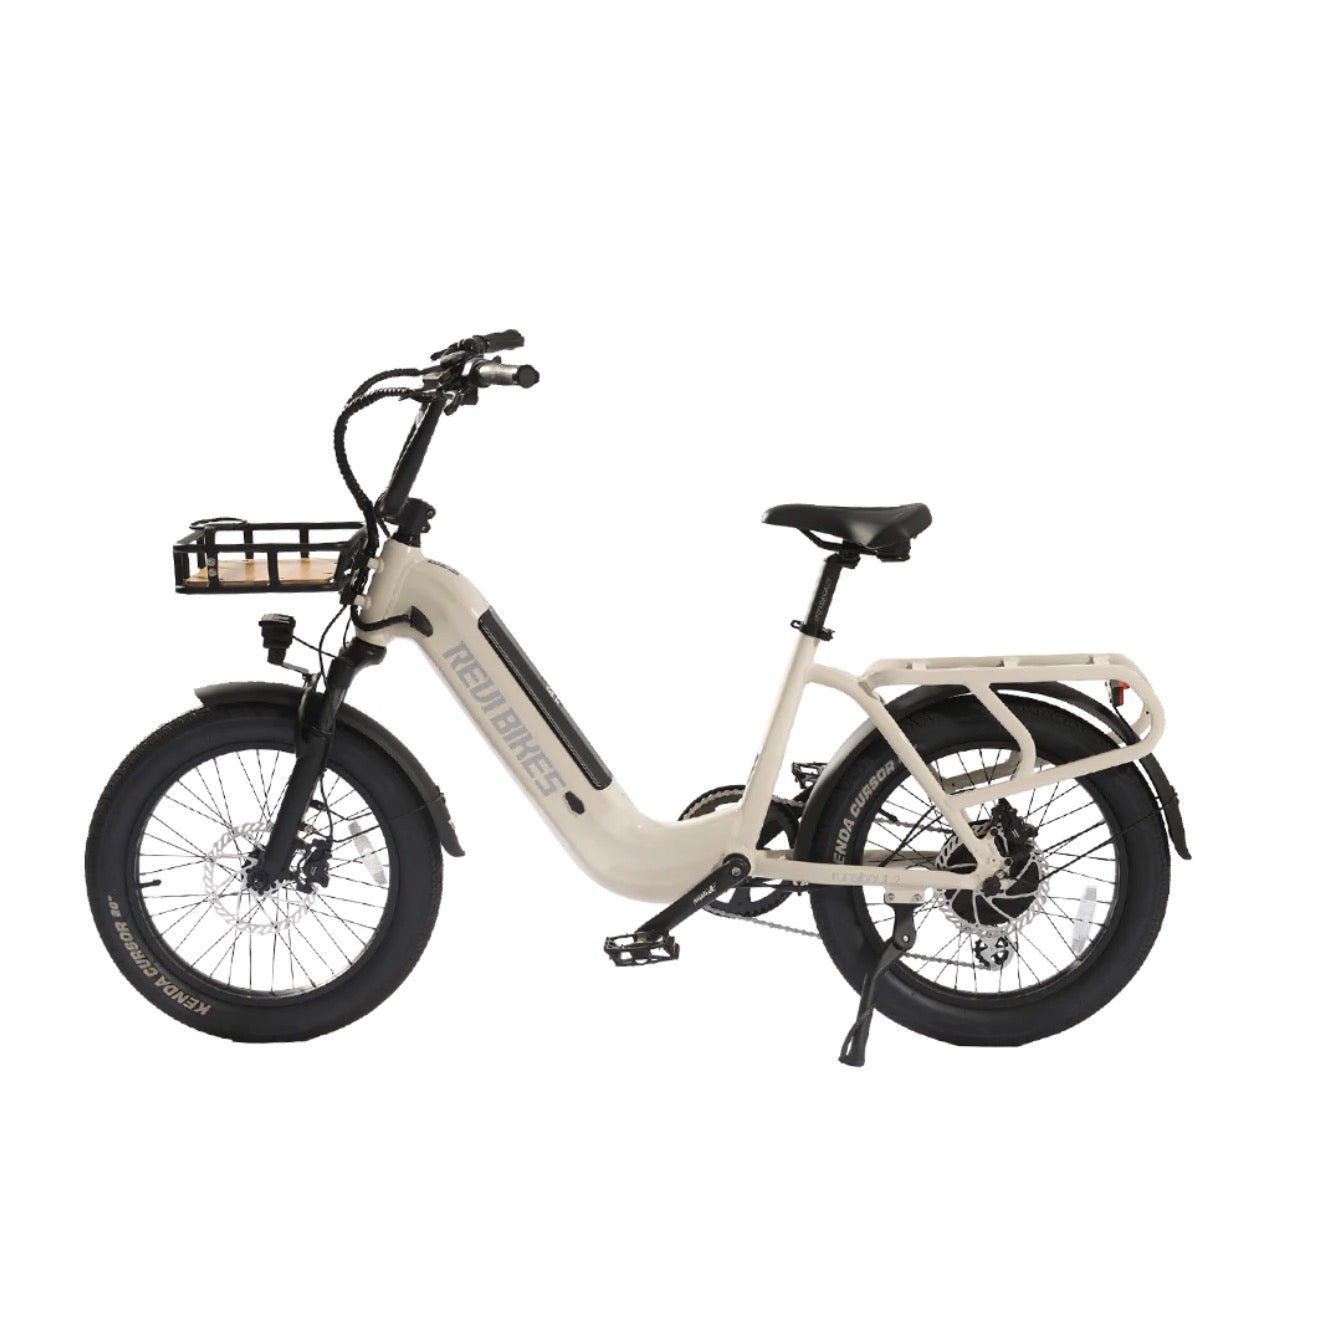 REVI BIKES REVI BIKES| Front Basket With Cup Holder For Runabout.2 - eBike Haul